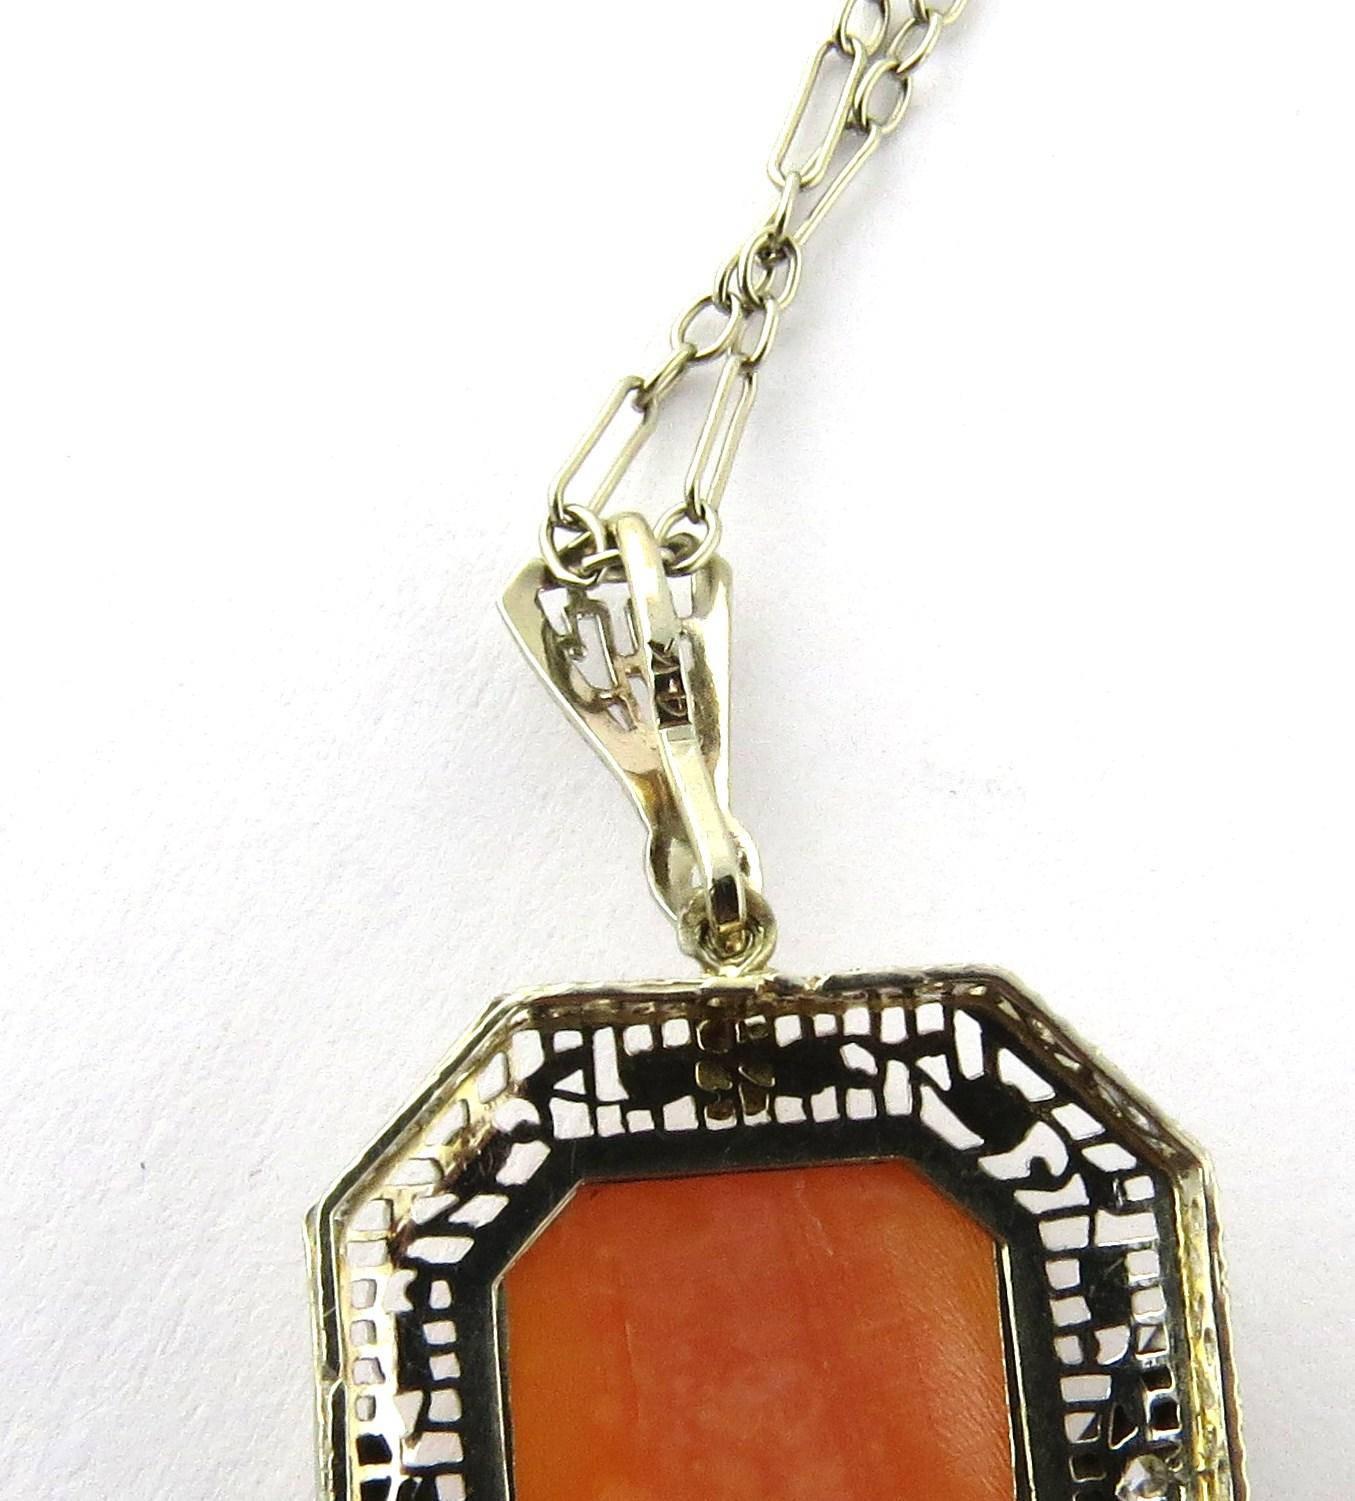 Antique Early Art Deco 14K White and Yellow Gold Filigree Cameo Pendant w/ Chain 1